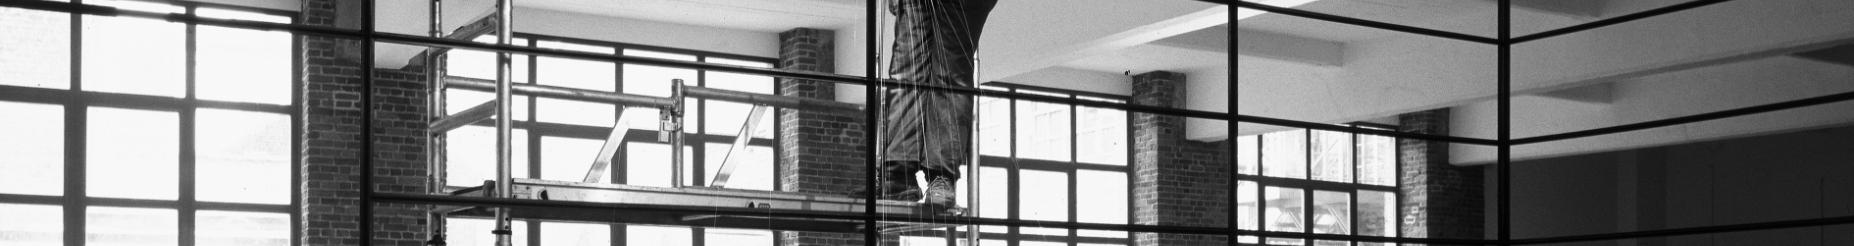 person standing on top of scaffolding inside a building